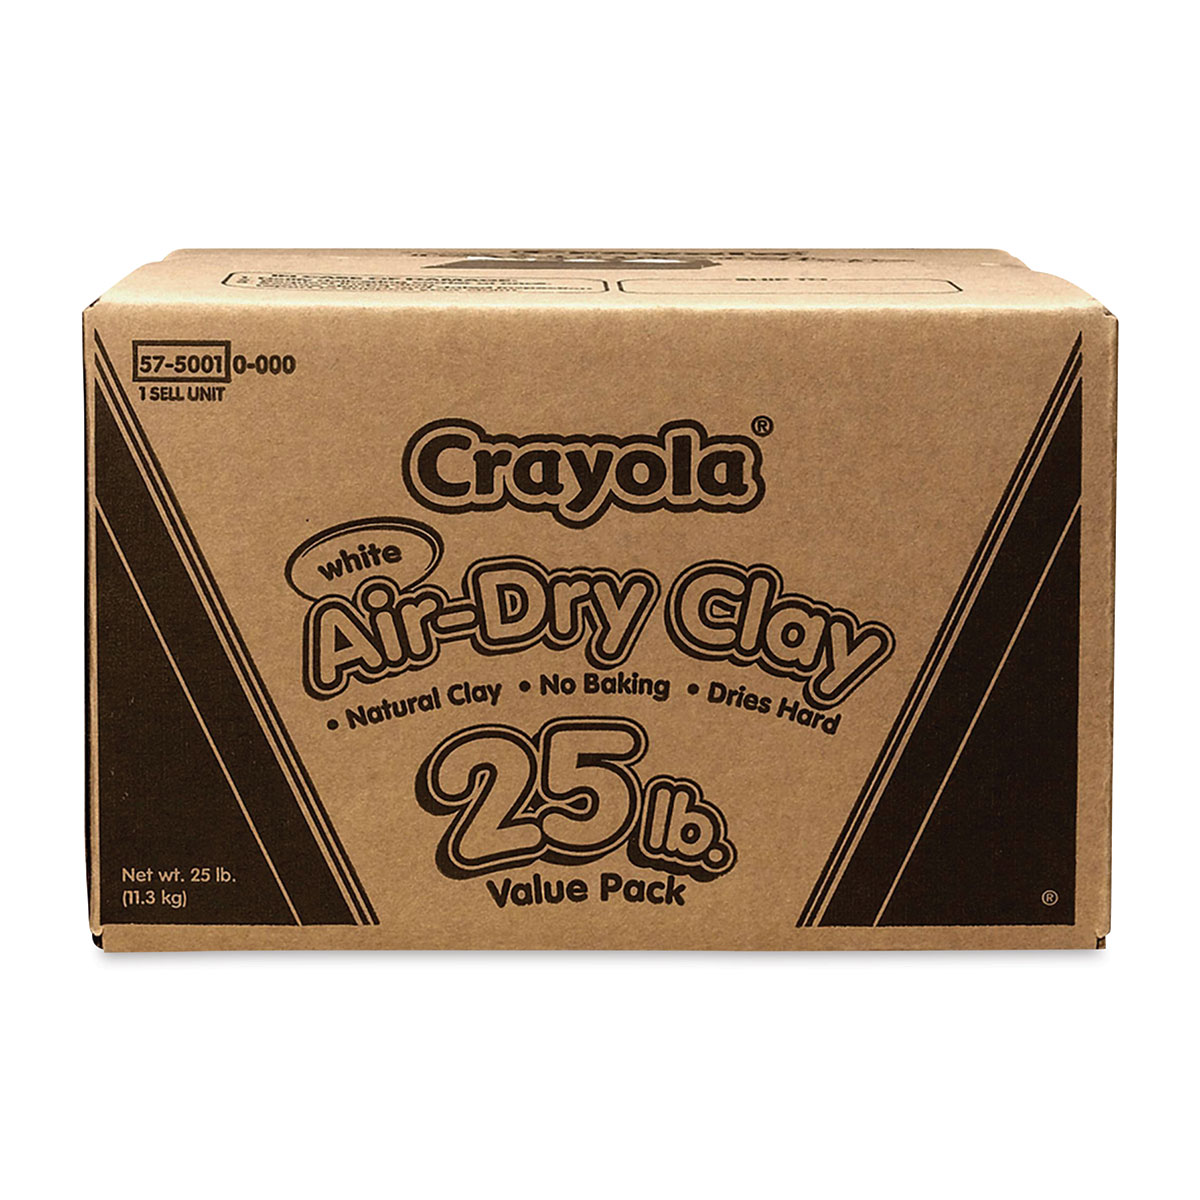 Crayola Air Dry Clay Bucket, White, Arts & Craft Supplies, 2.5 Pounds